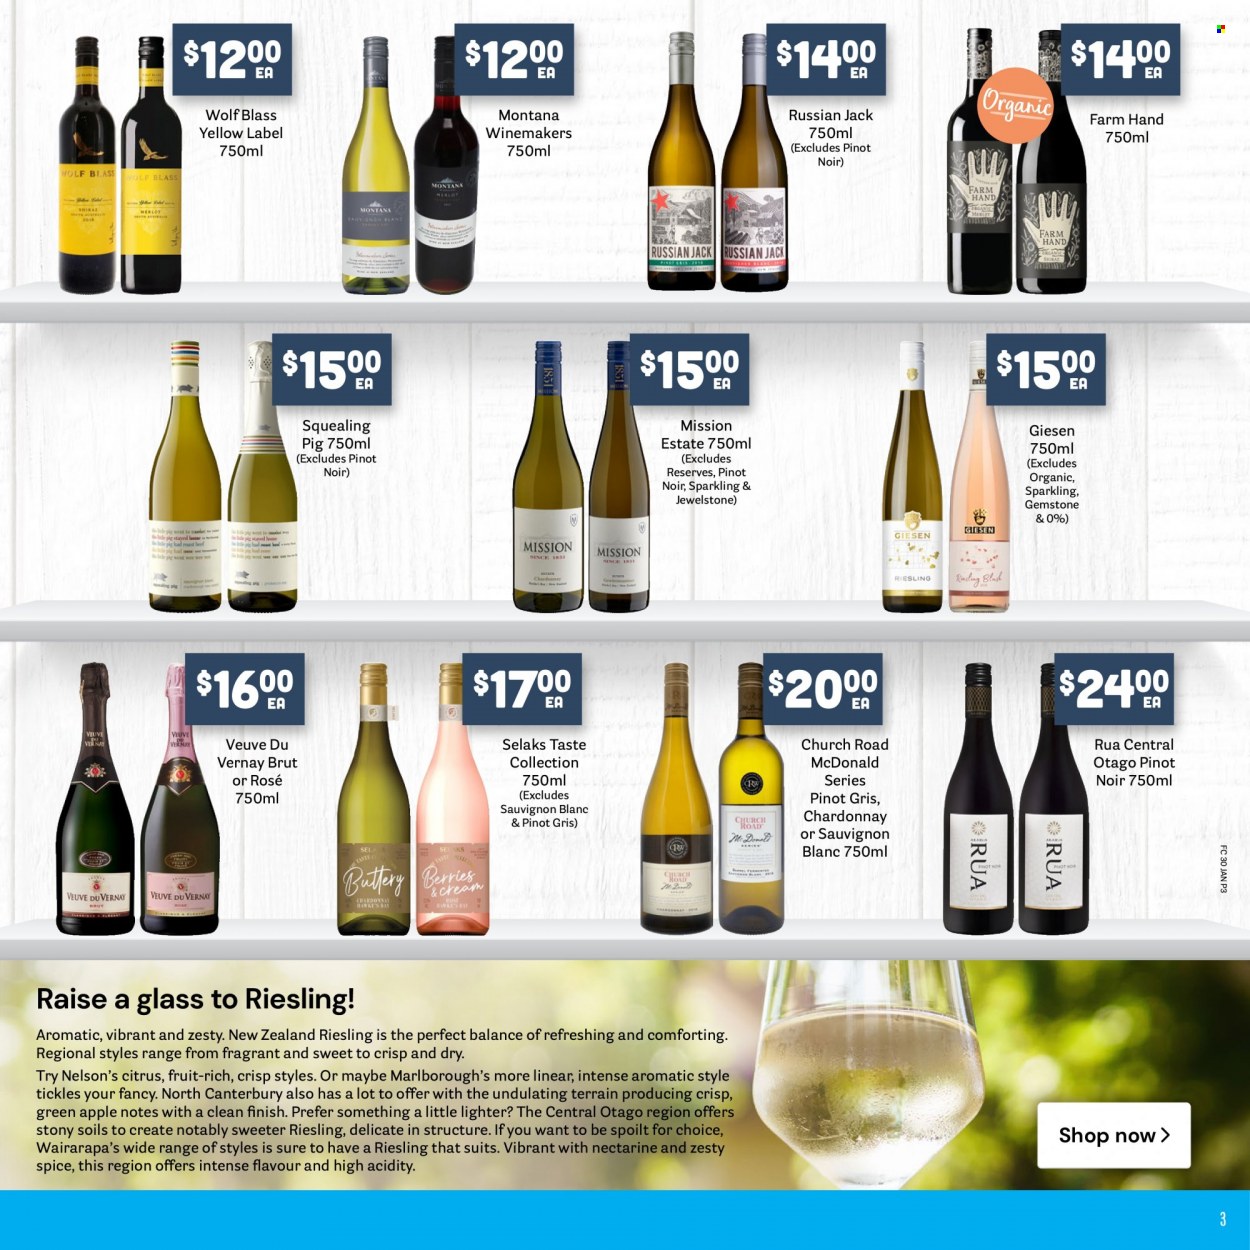 thumbnail - Fresh Choice mailer - 30.01.2023 - 05.02.2023 - Sales products - nectarines, spice, red wine, Riesling, white wine, Chardonnay, wine, Pinot Noir, Pinot Grigio, Sauvignon Blanc, rosé wine, Brut, rose. Page 3.